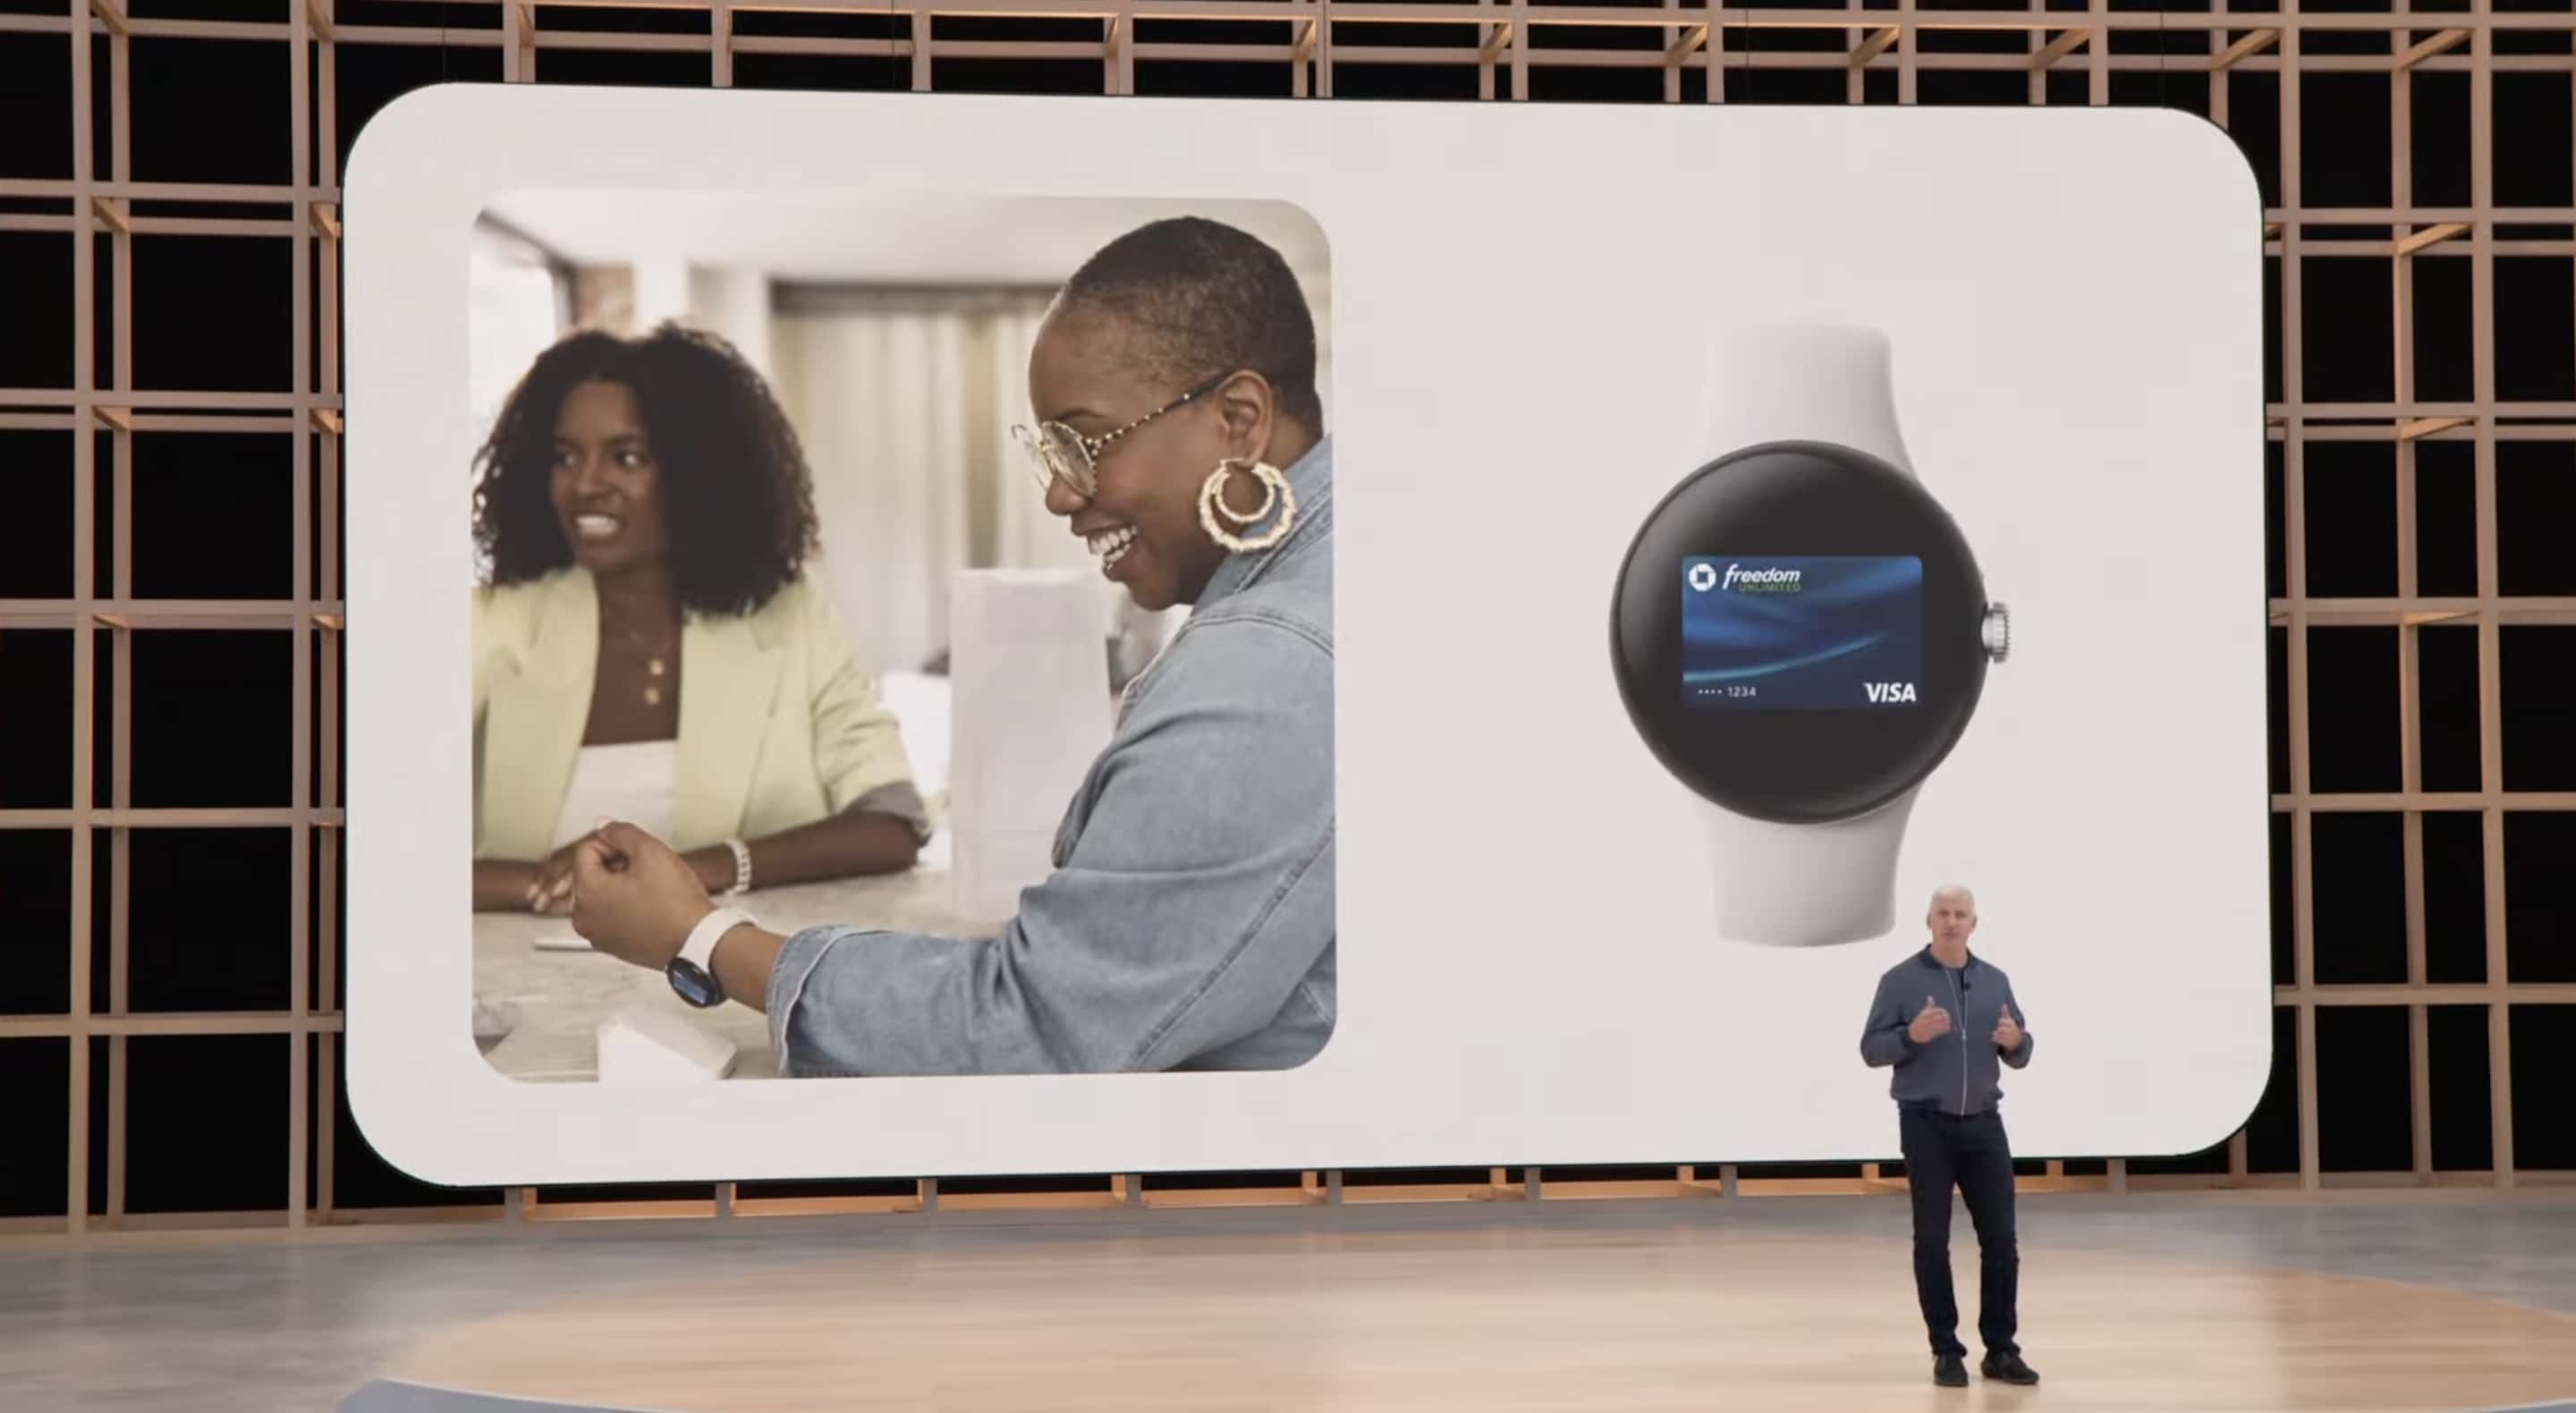 Google's Pixel Watch is slated to handle Smart Unlock using its own  companion app rather than that of Wear OS 3 -  News